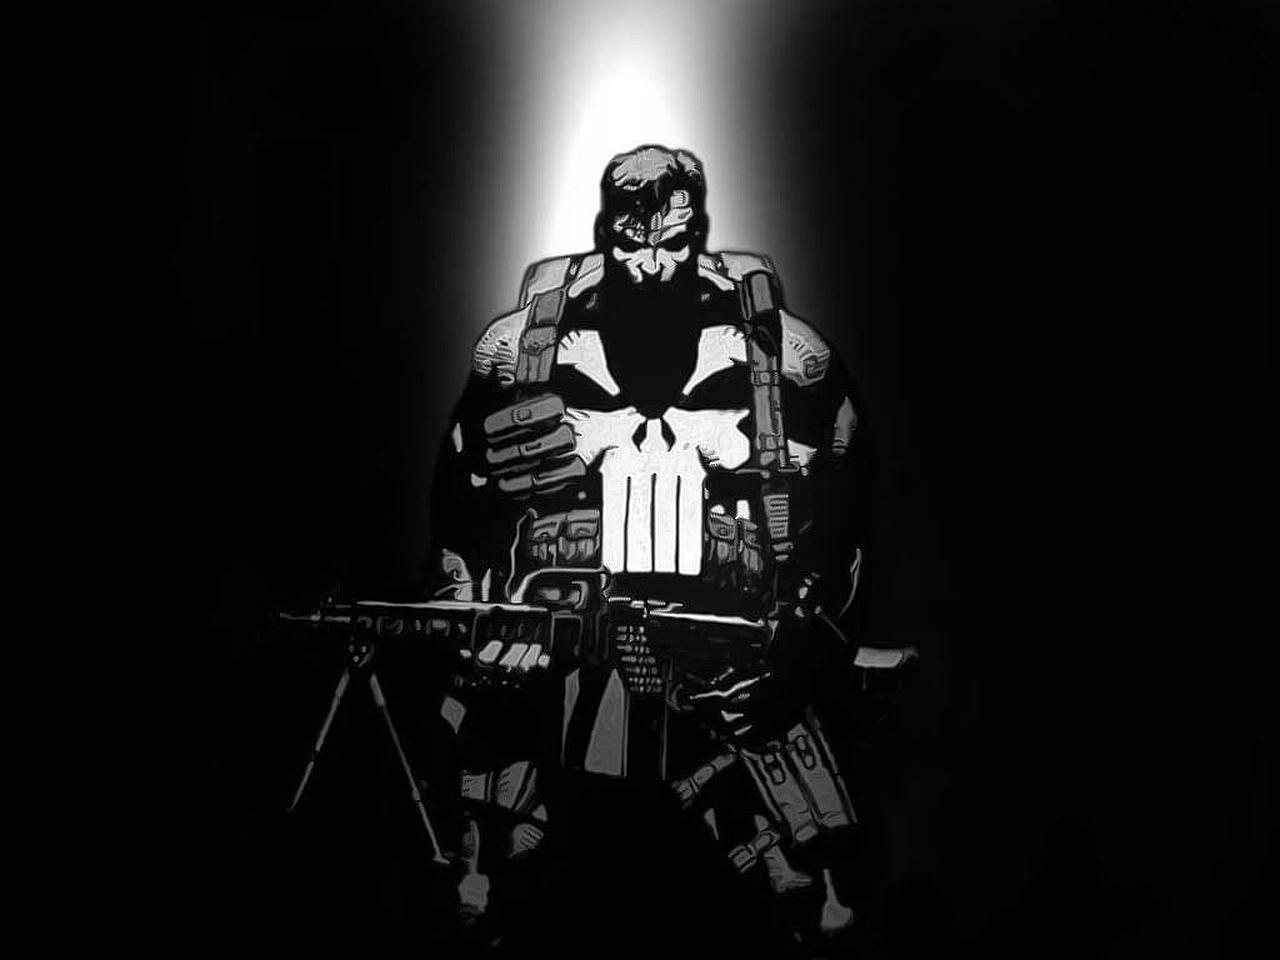 Punisher HD Wallpaper Background For Free Download, BsnSCB Gallery